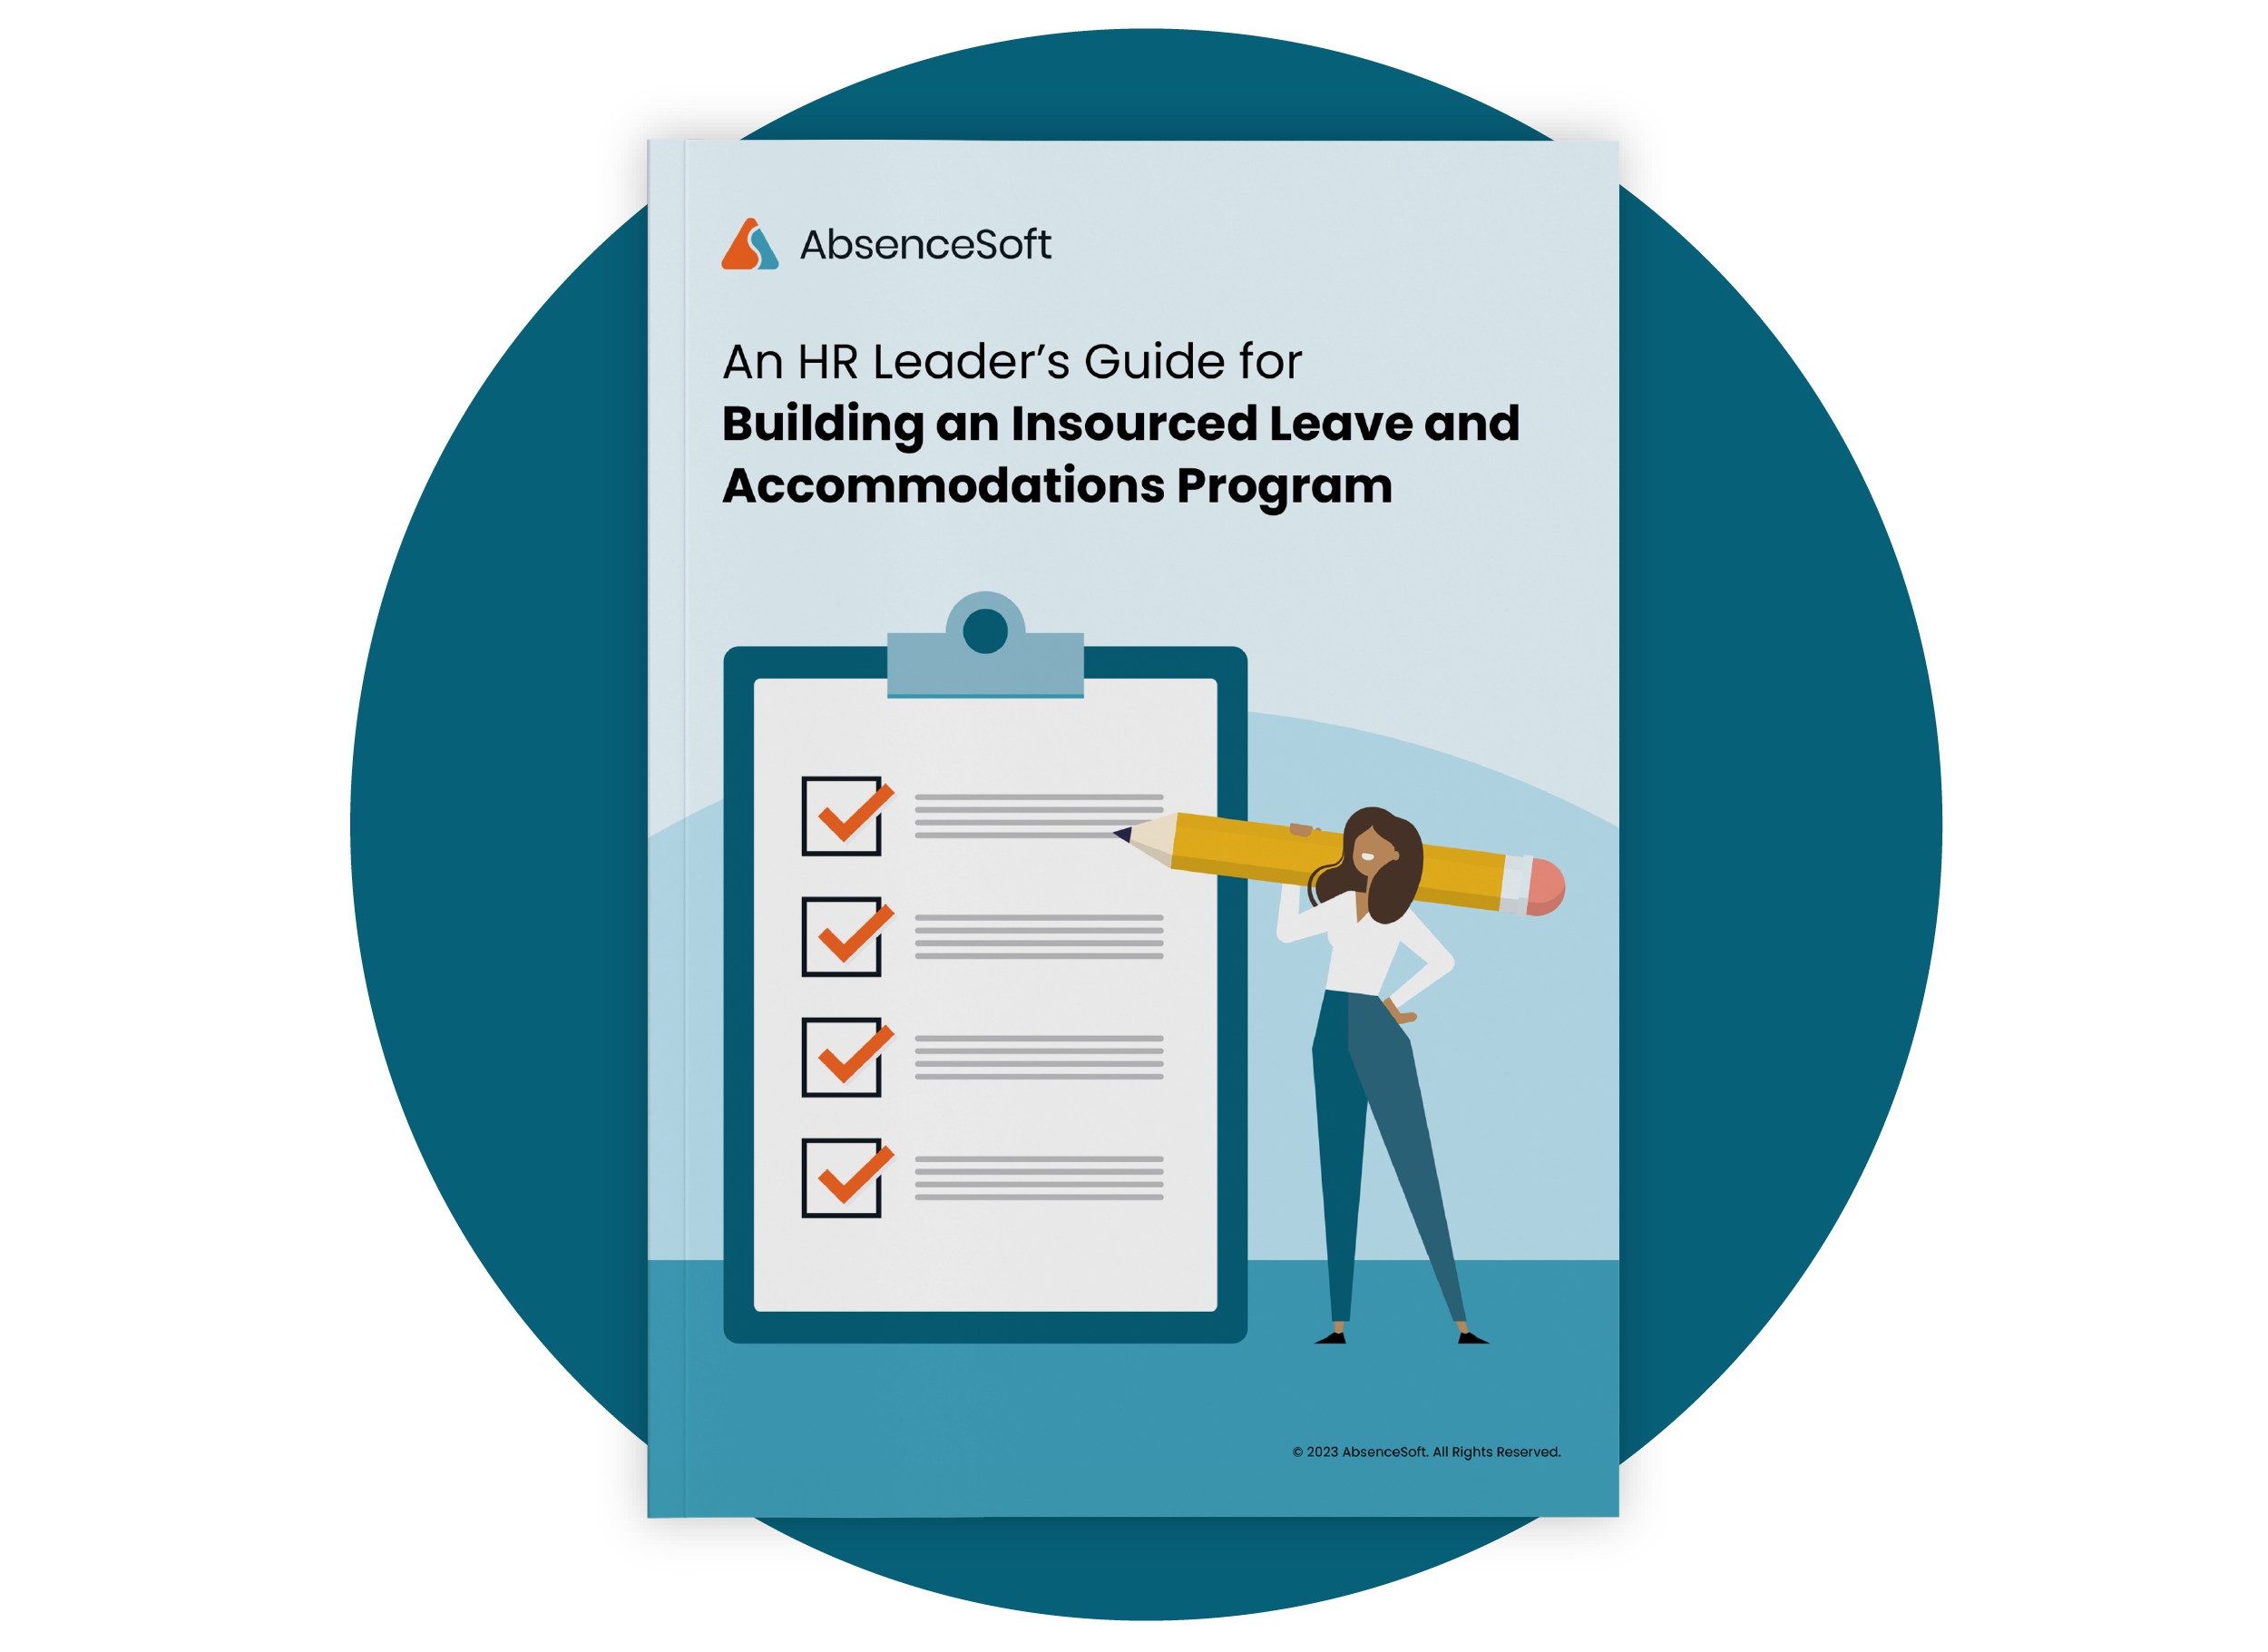 HR Leaders Guide for Building and Insourced Leave and Accommodations Program